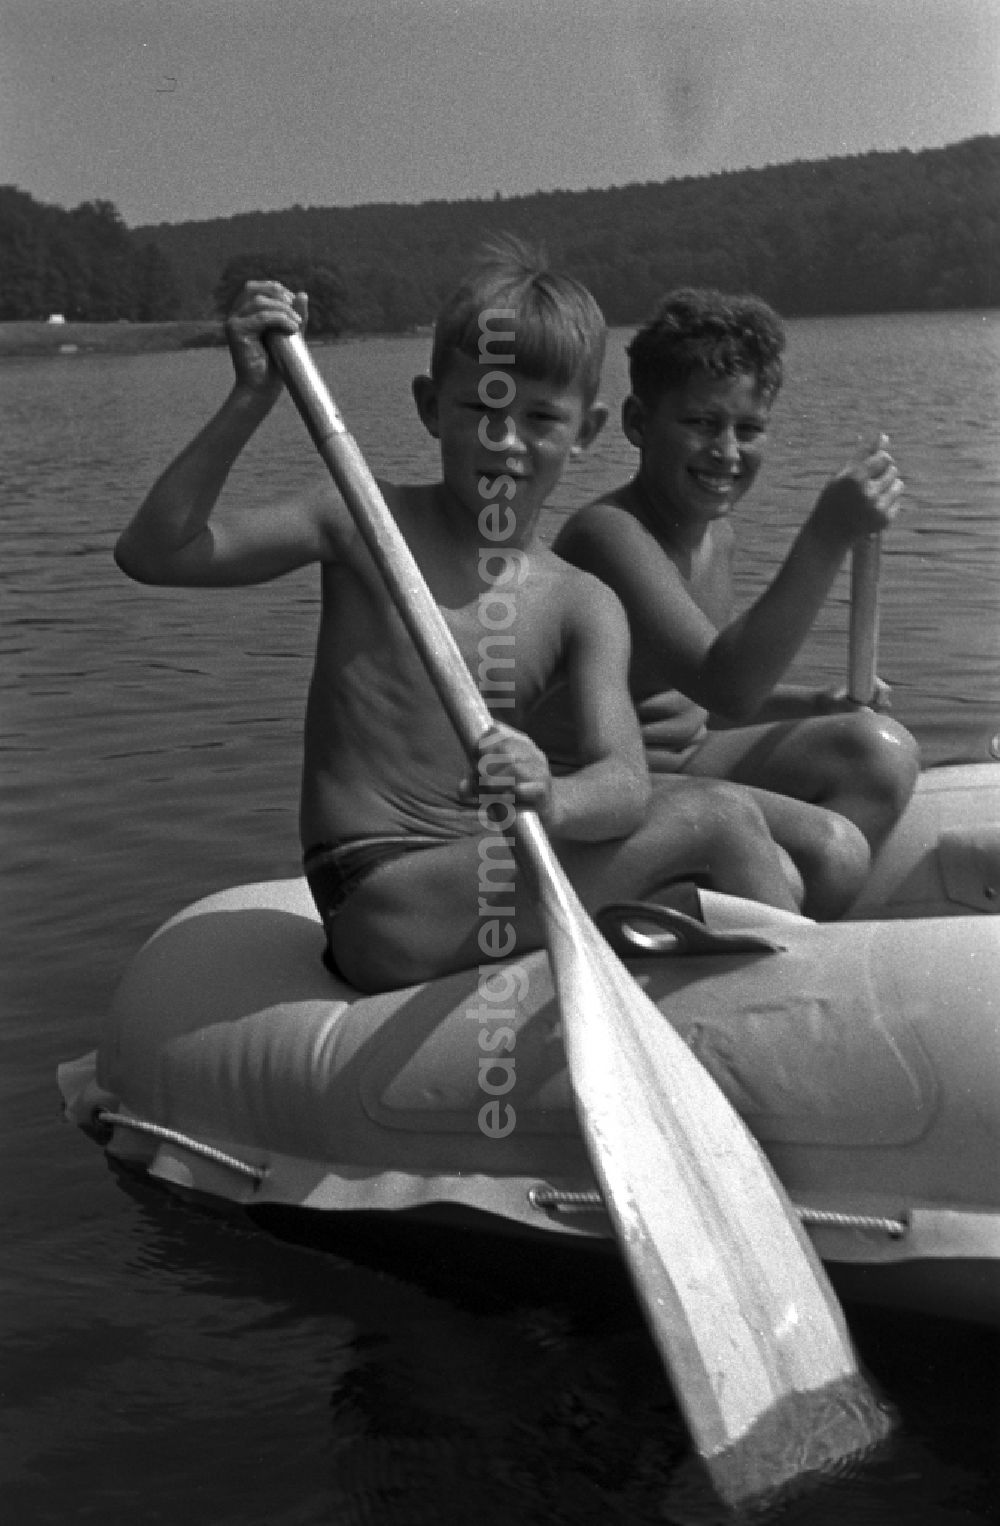 GDR photo archive: Neuruppin OT Stendenitz - 2 guys in a dinghy with paddles on the Tornowsee in Brandenburg